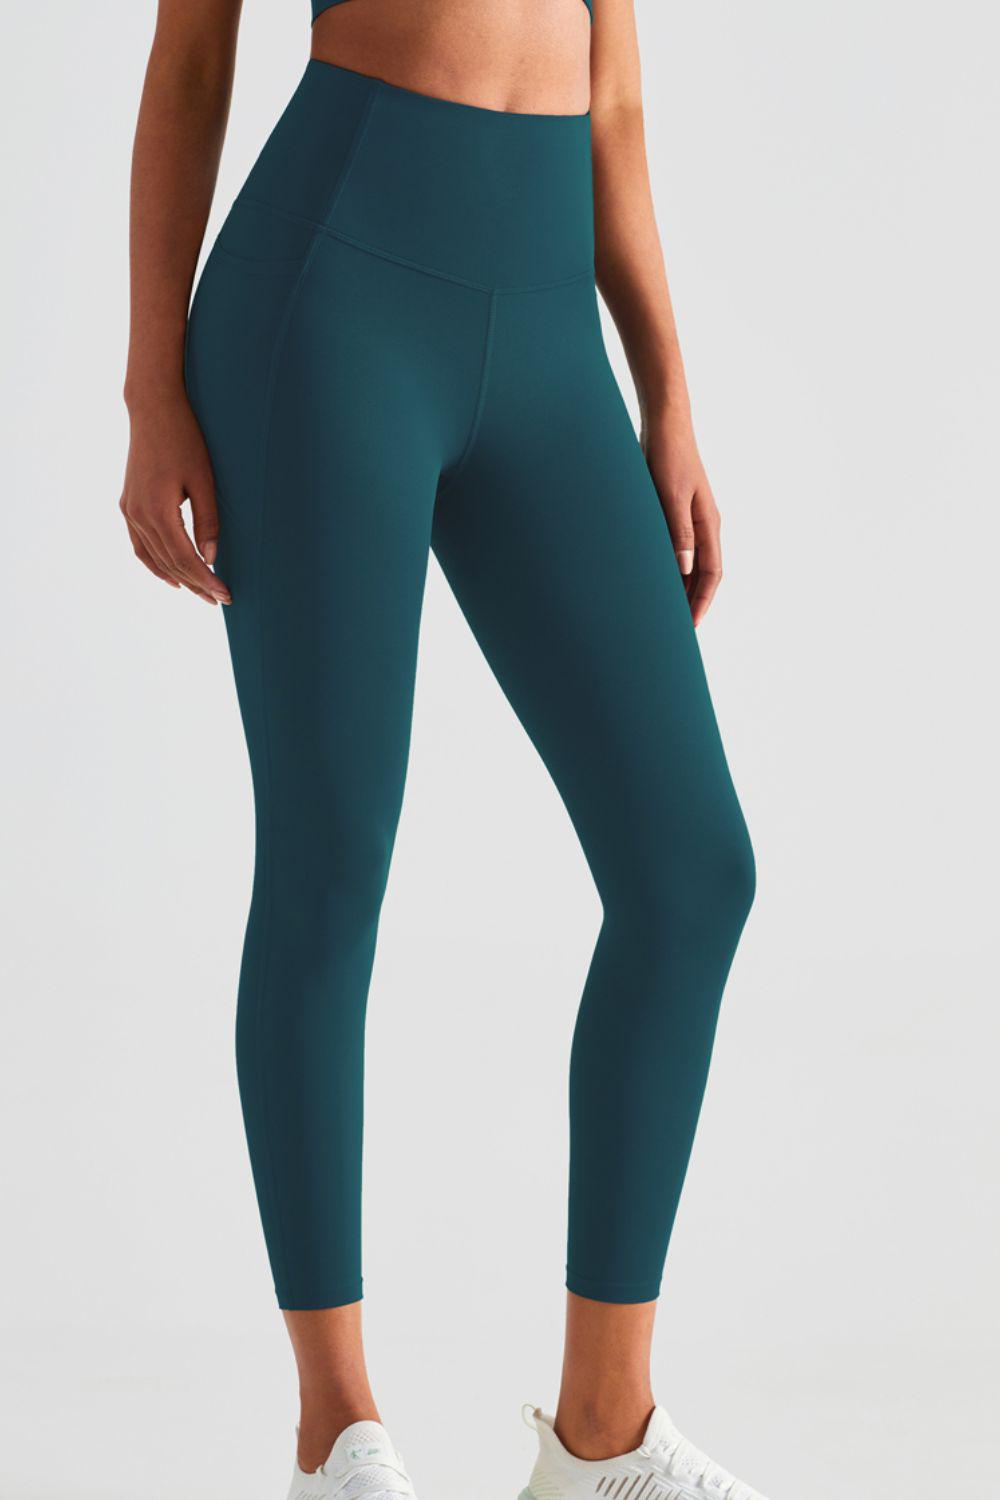 Wide Waistband Sports Leggings with Pockets-BOTTOM SIZES SMALL MEDIUM LARGE-[Adult]-[Female]-Deep Teal-4-2022 Online Blue Zone Planet